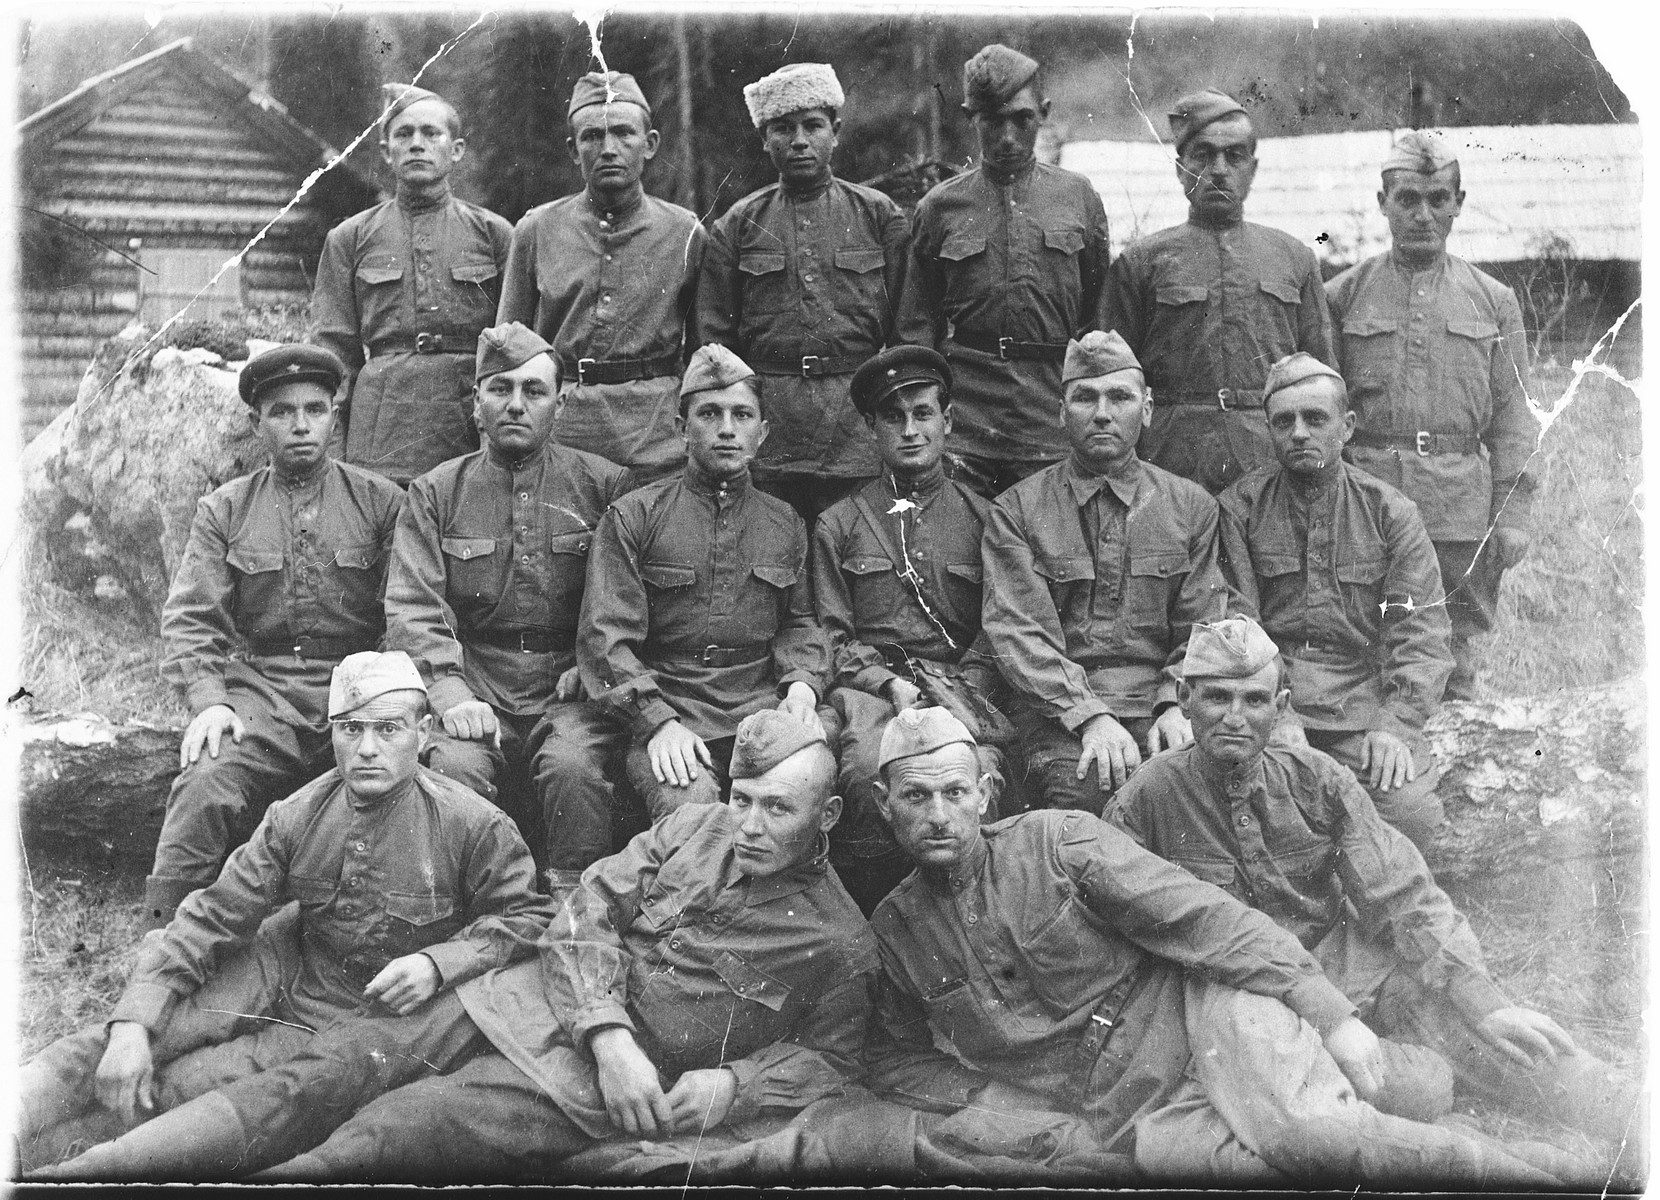 Group portrait of Soviet soldiers.

Among those pictured is Shlomo Rachmil (second row, third from the right).